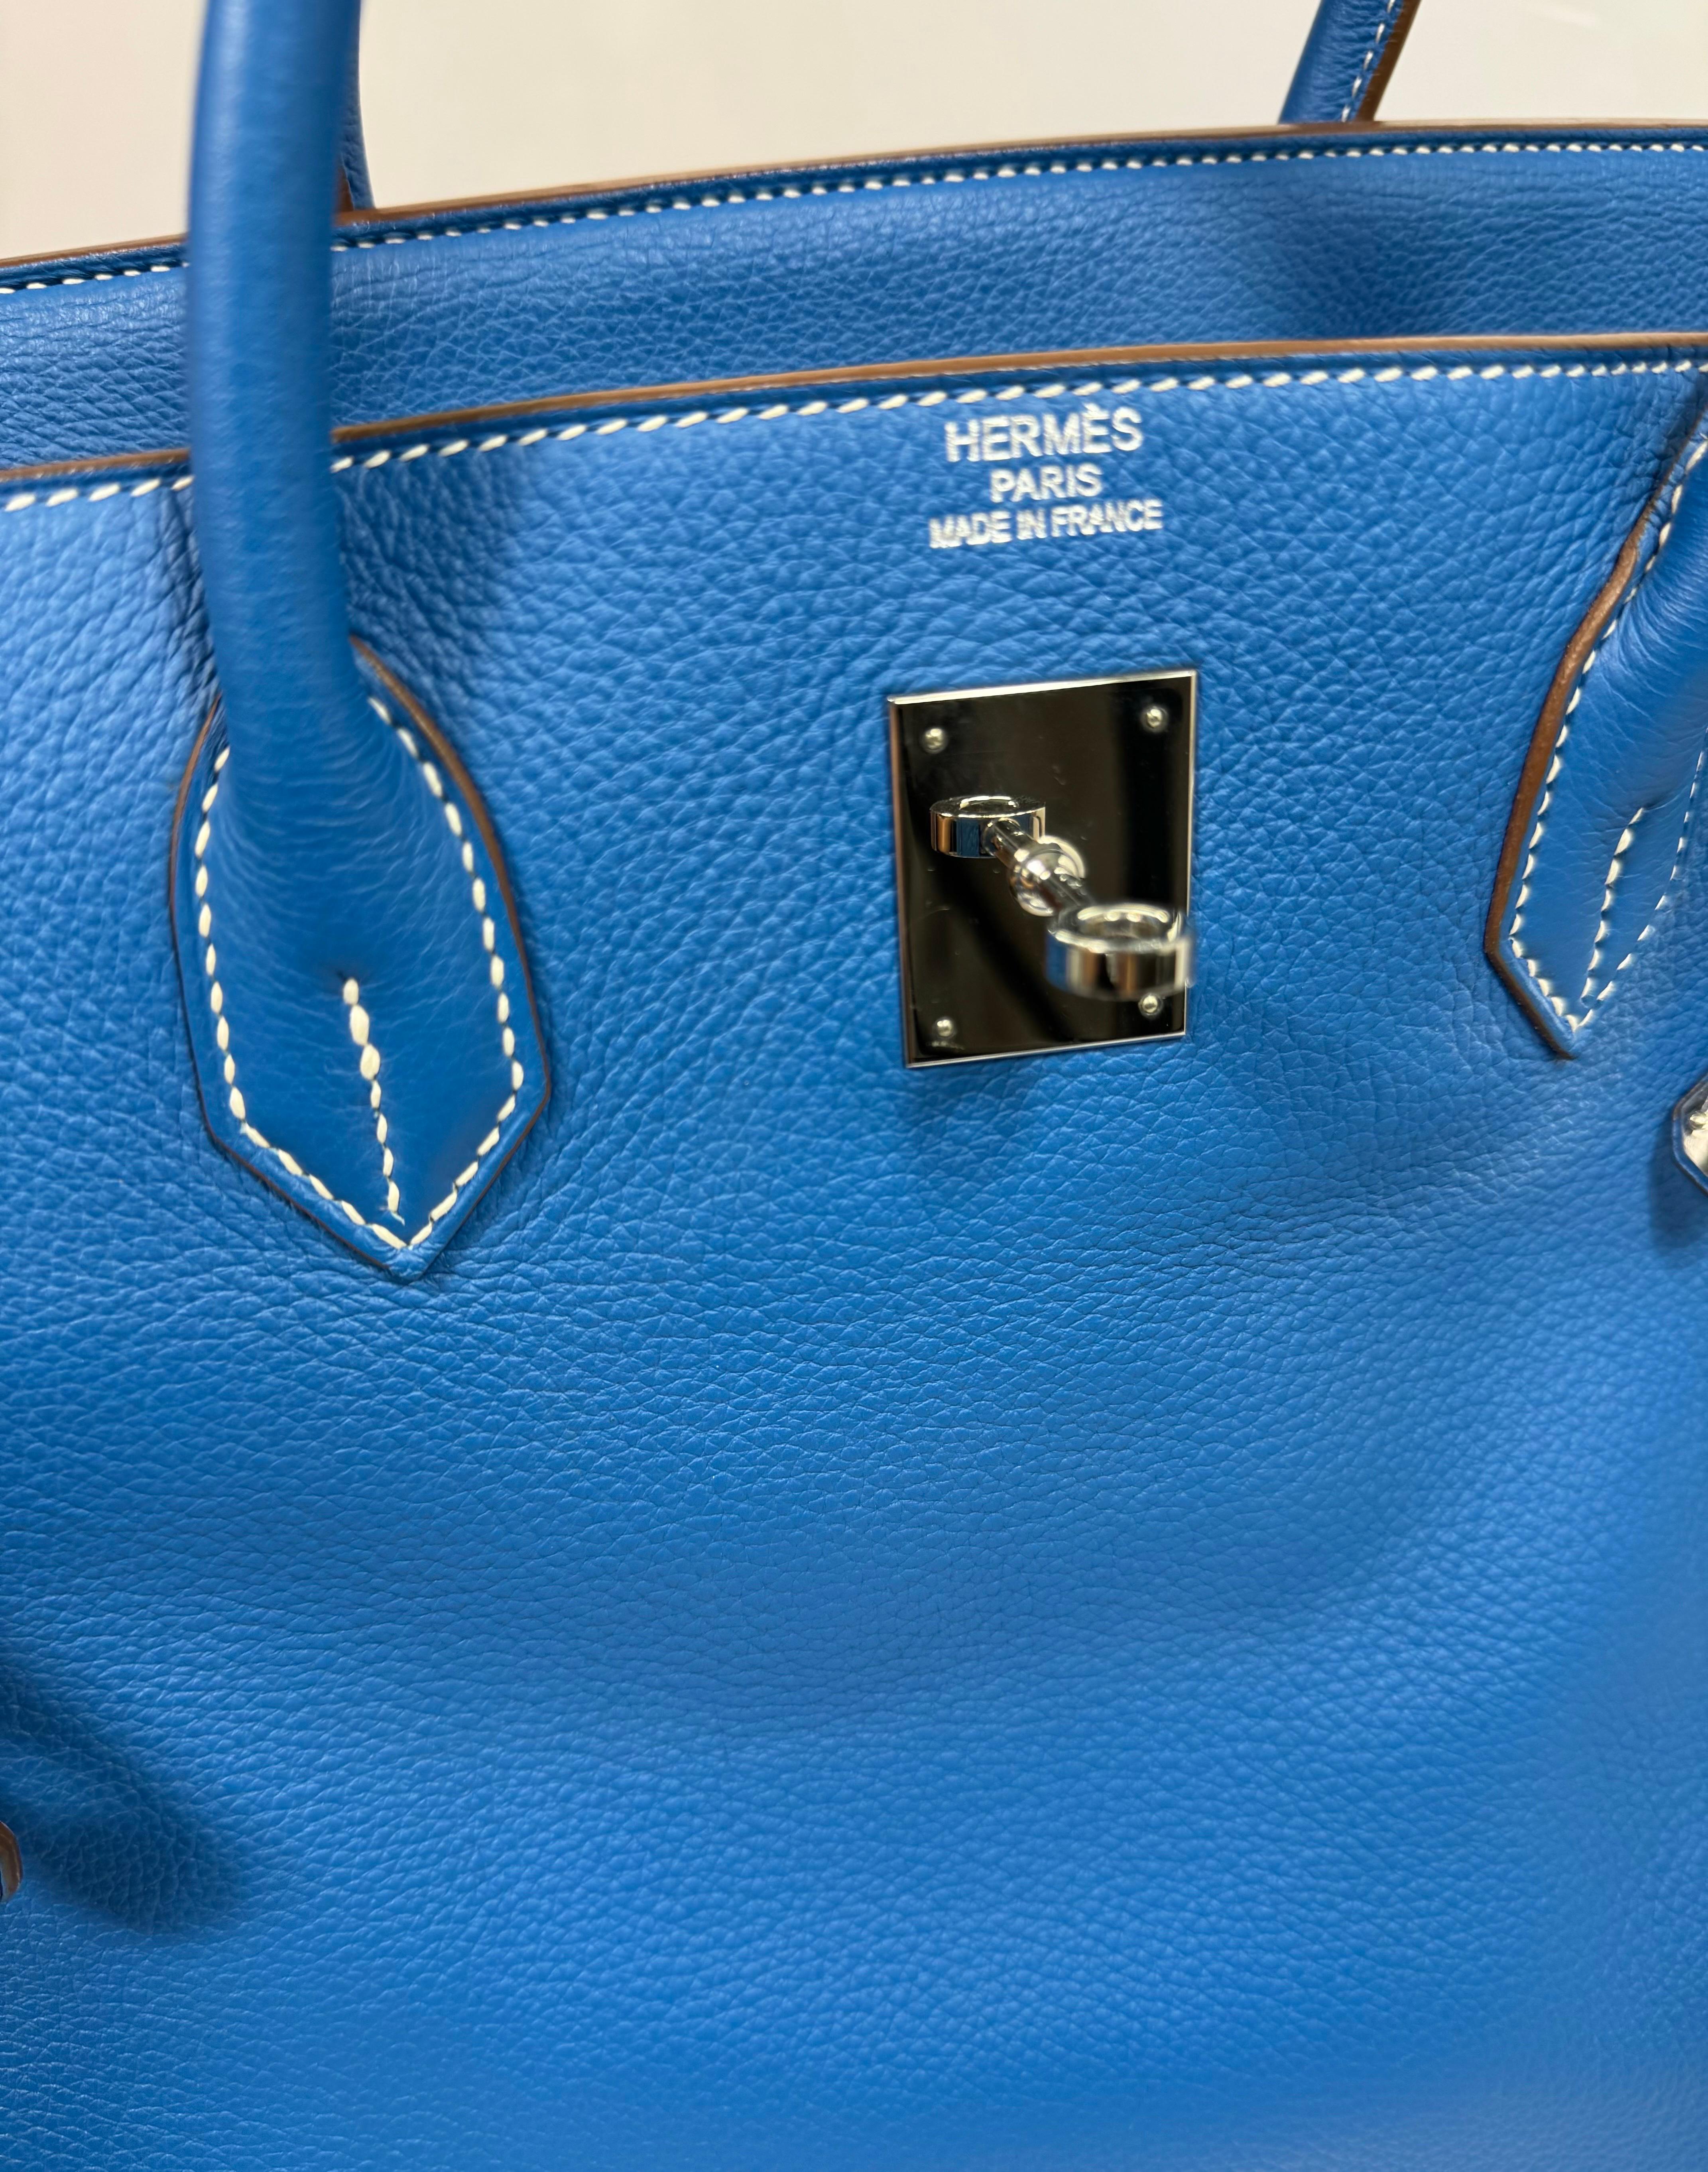 Hermes 40cm  Mykonos Blue and White Clemence Limited edition Birkin-SHW -2011 For Sale 7